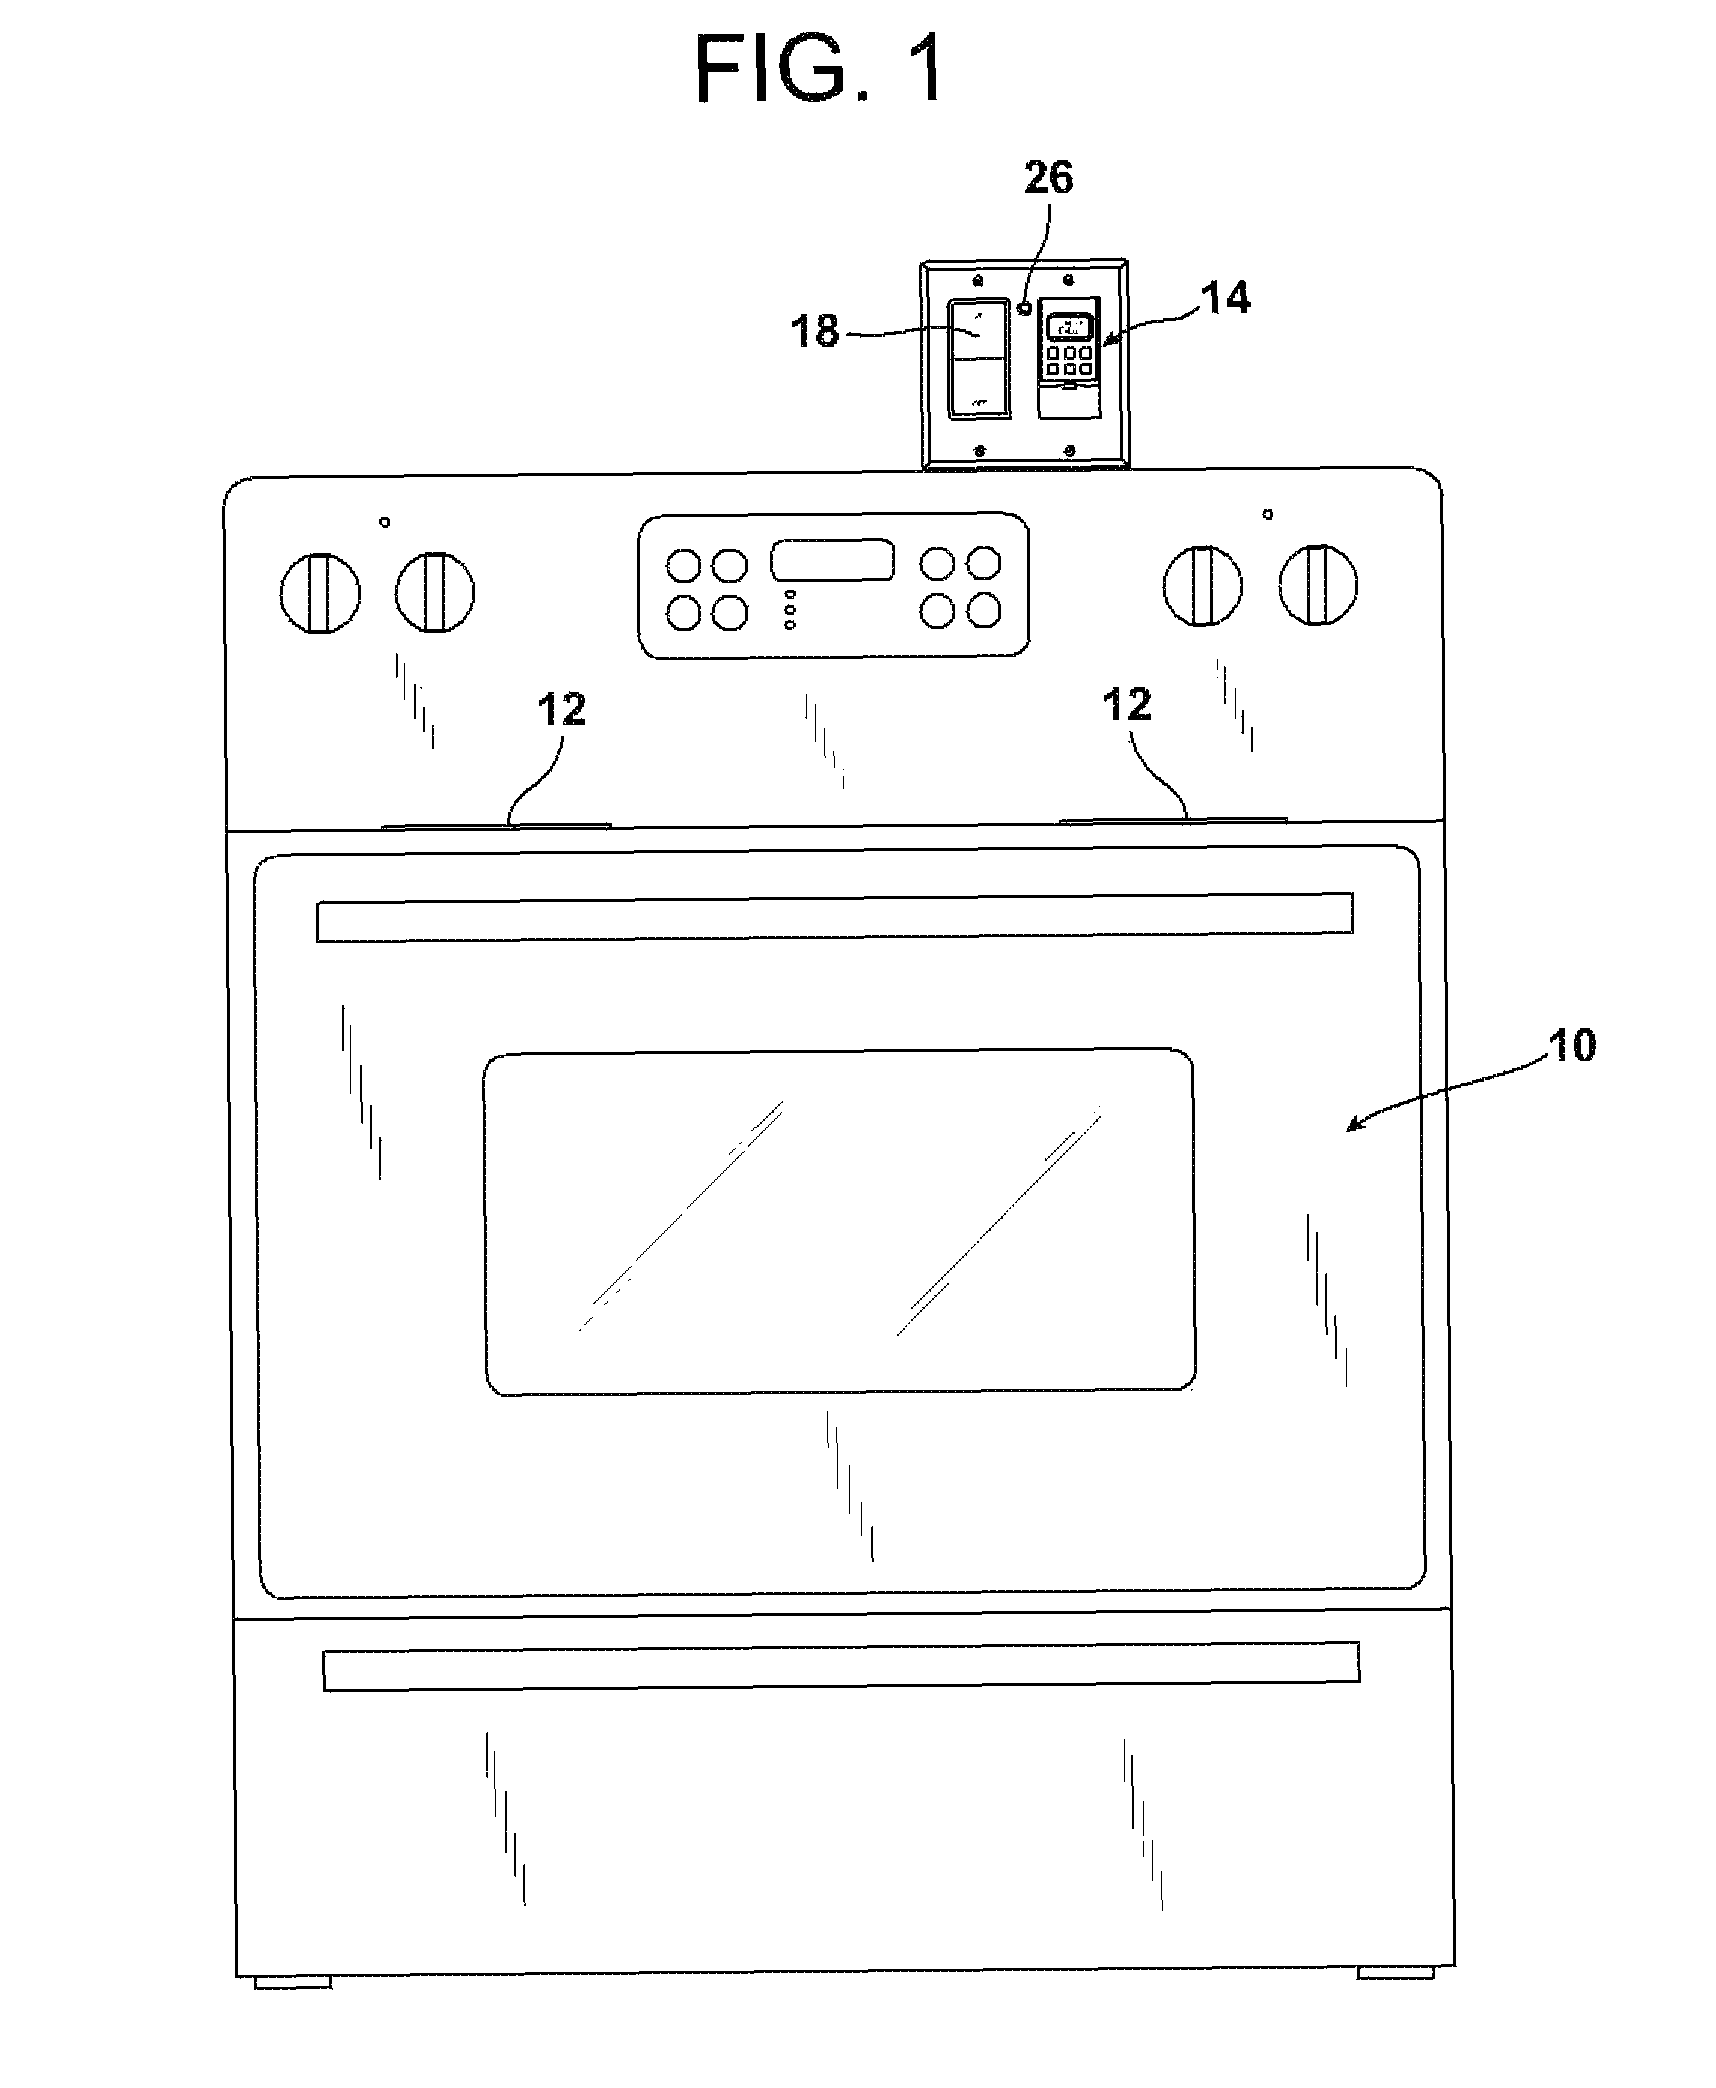 Control system for cooking appliance during jewish holidays and sabbath